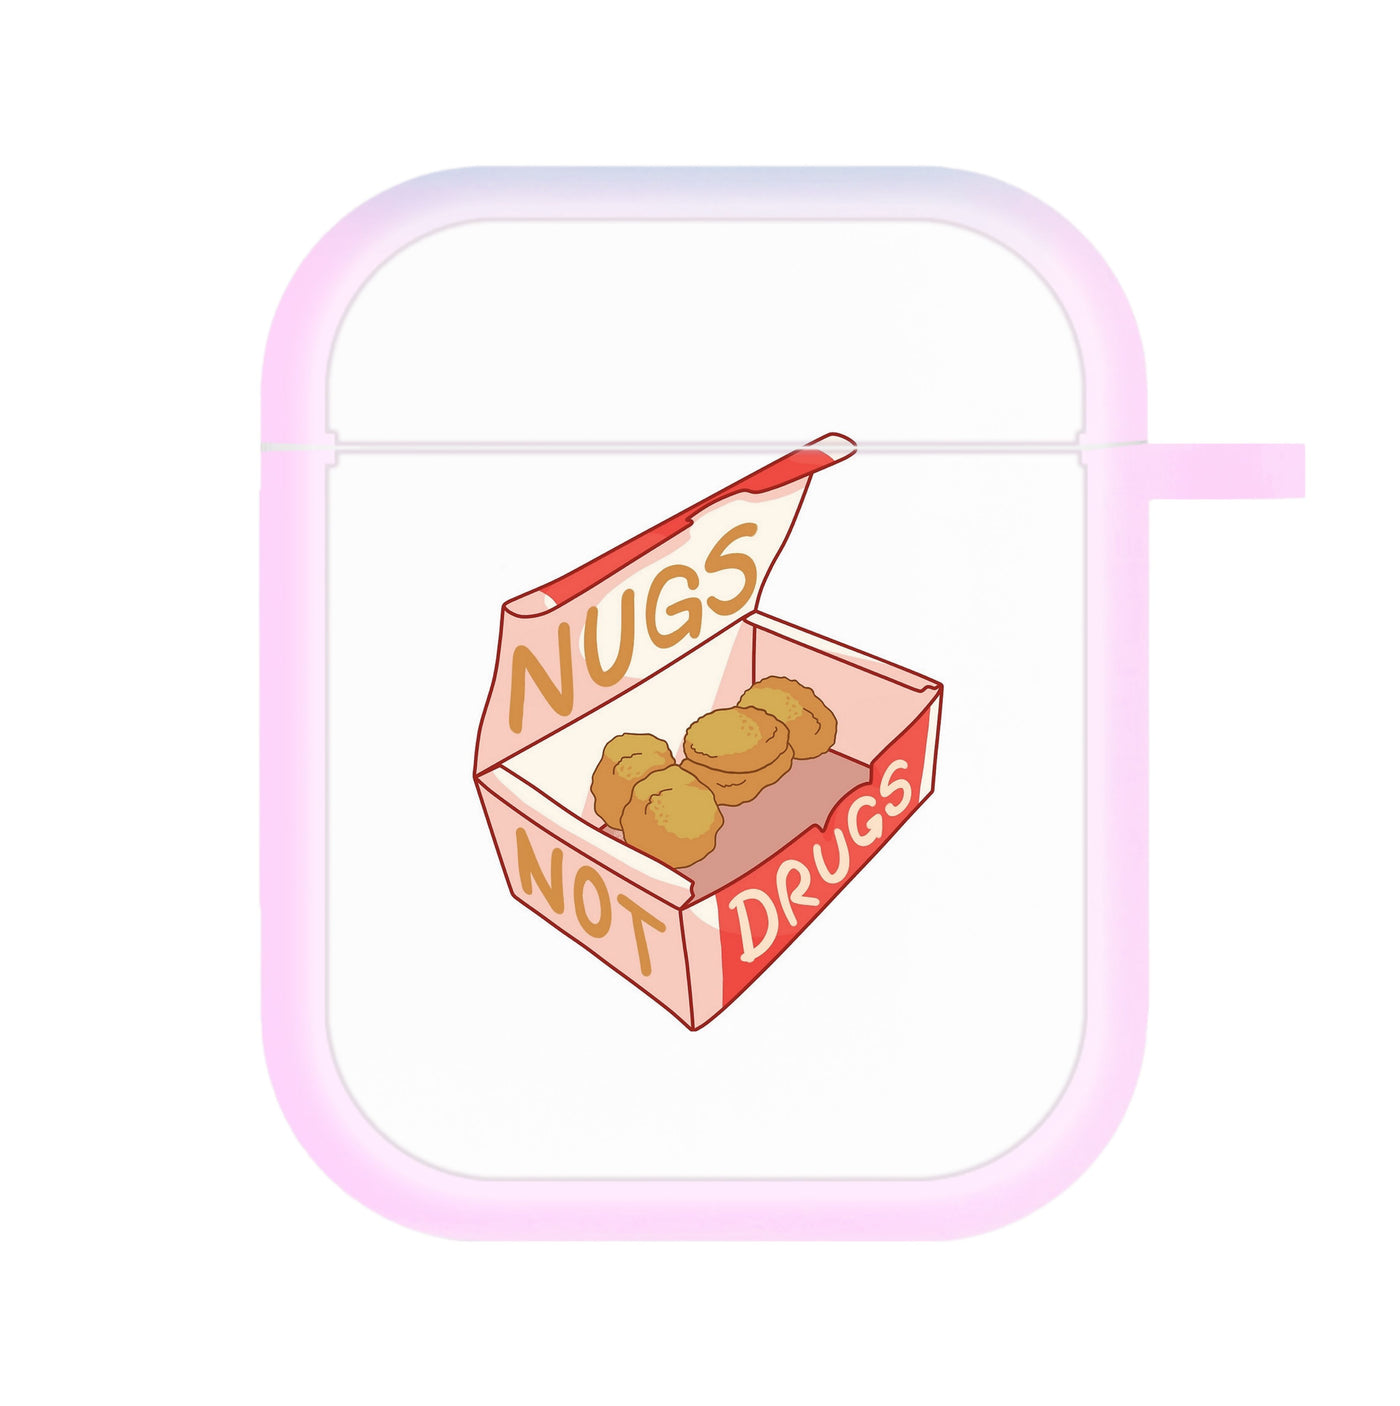 Nugs not Drugs Tumblr Style AirPods Case